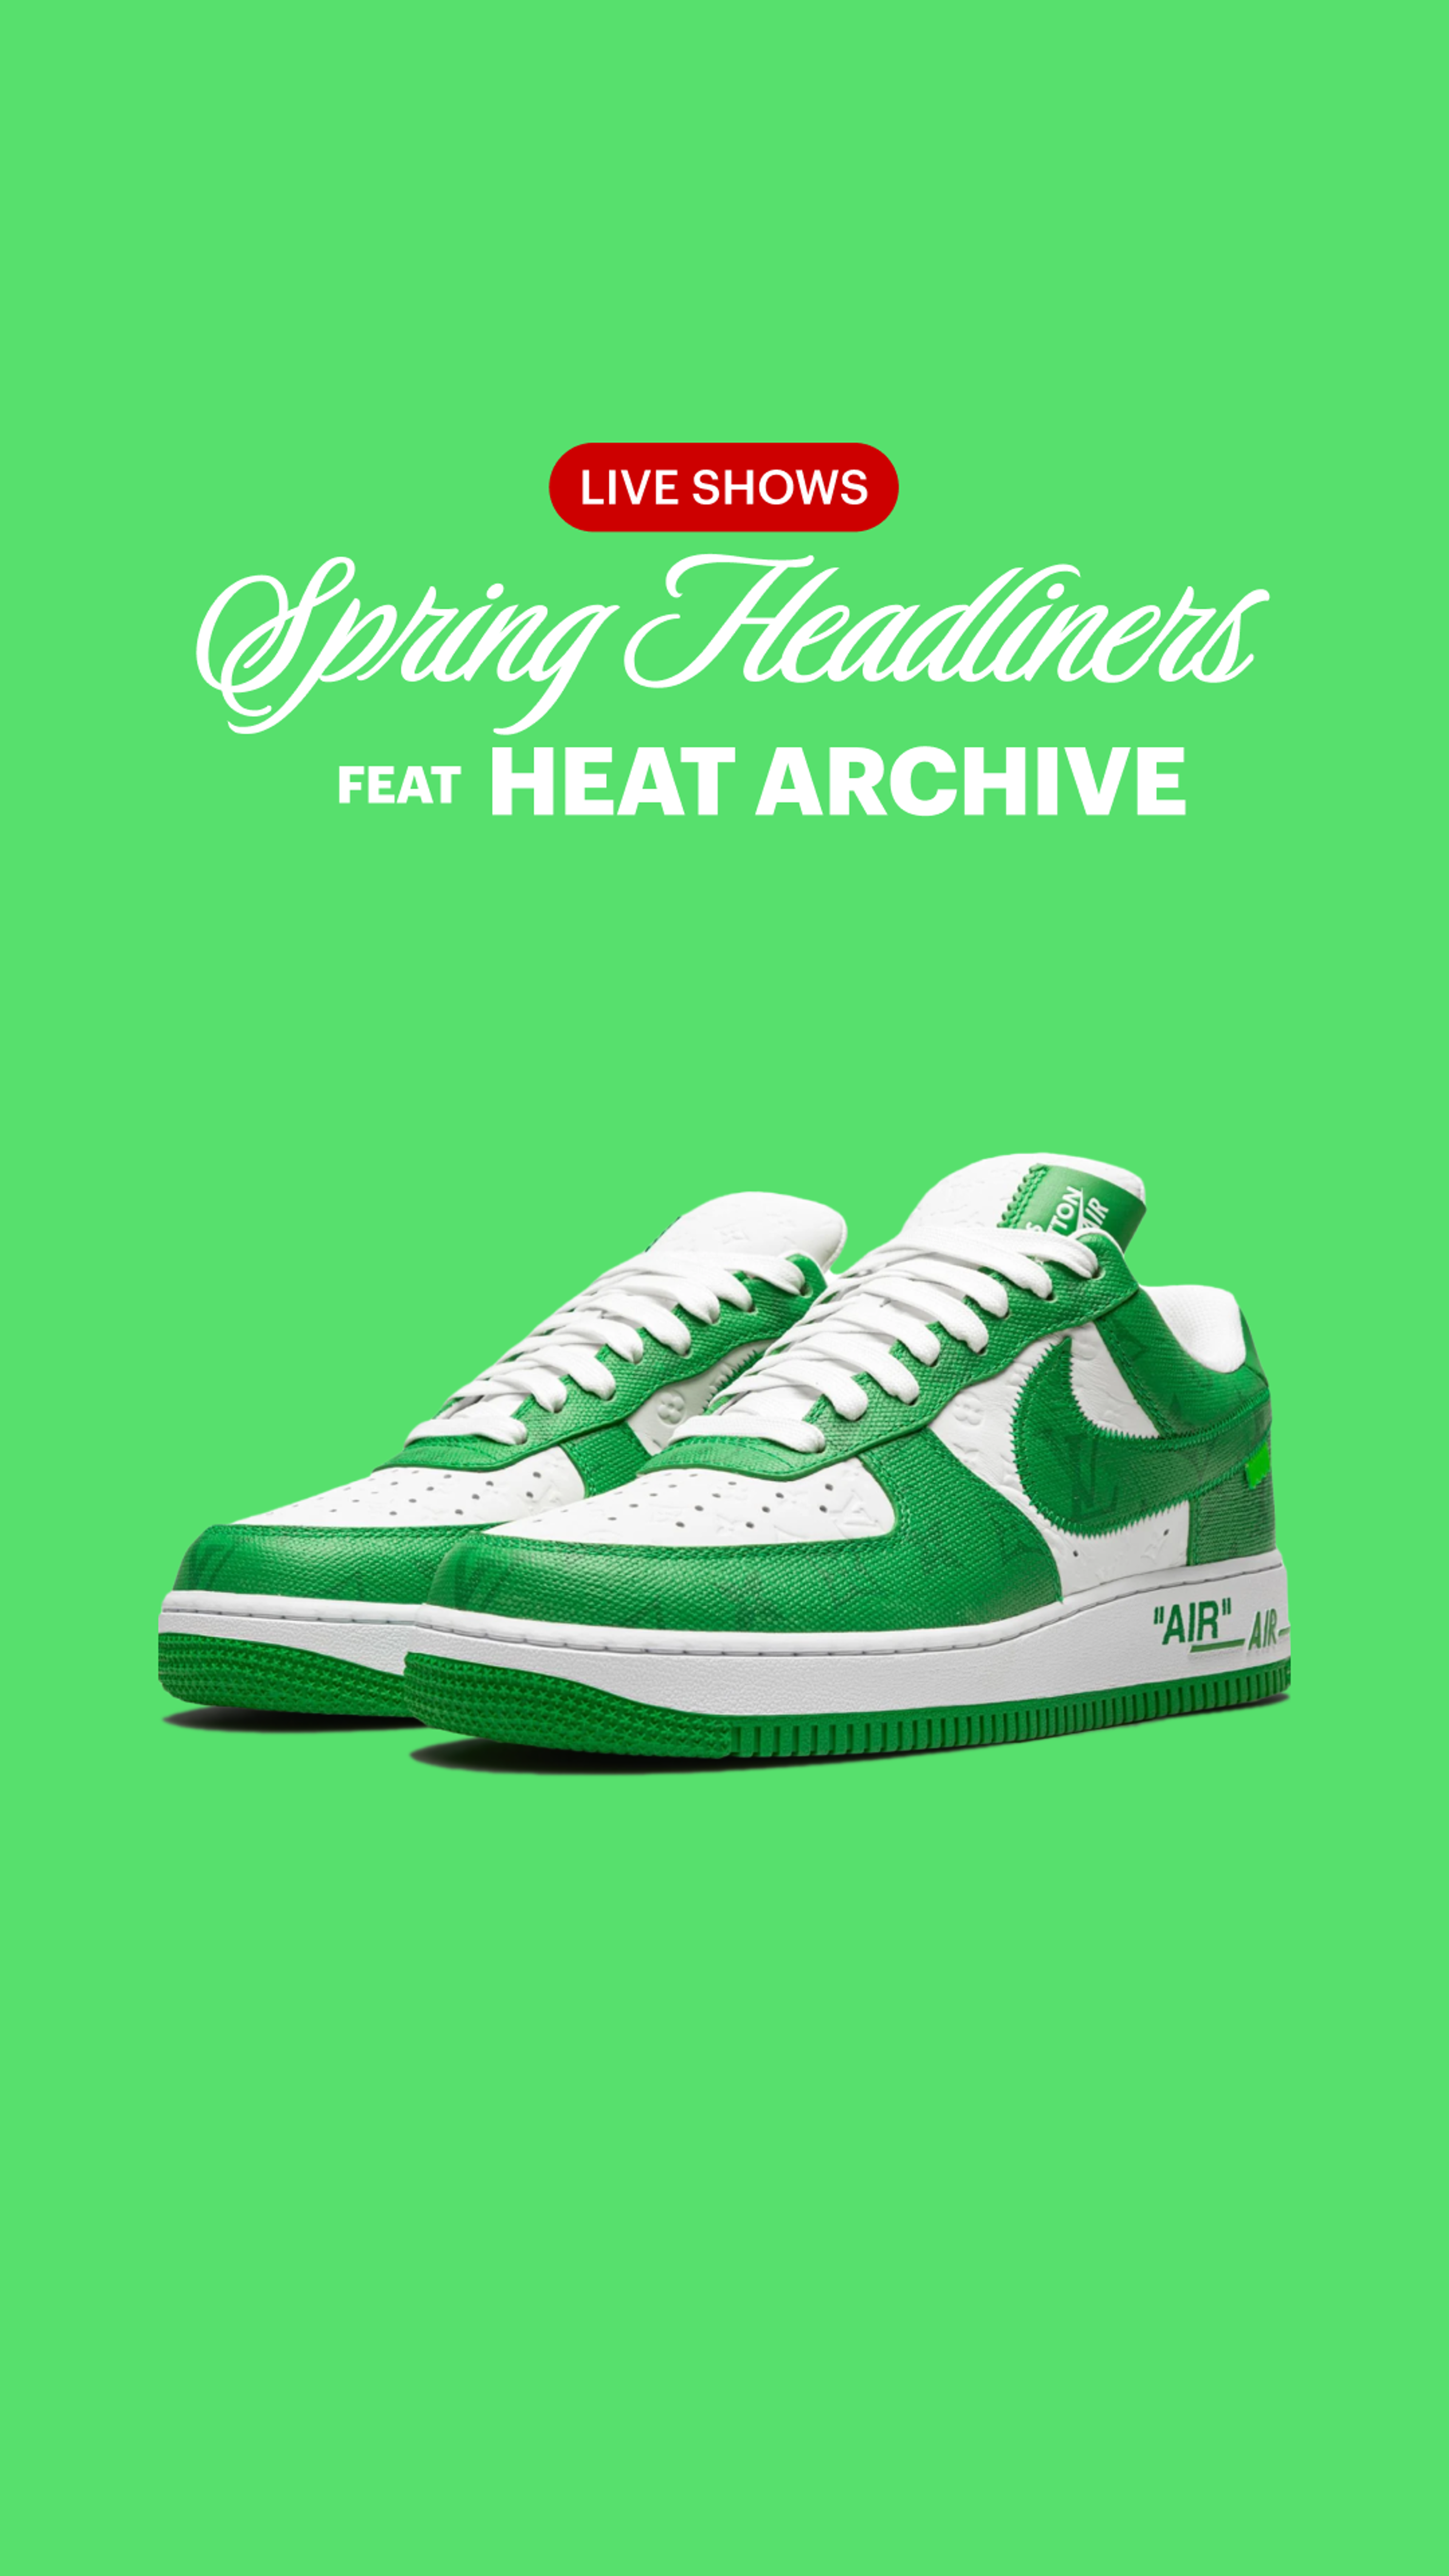 Preview image for the show titled "Spring Shopping Guide with Heat Archive" at April 29, 2024